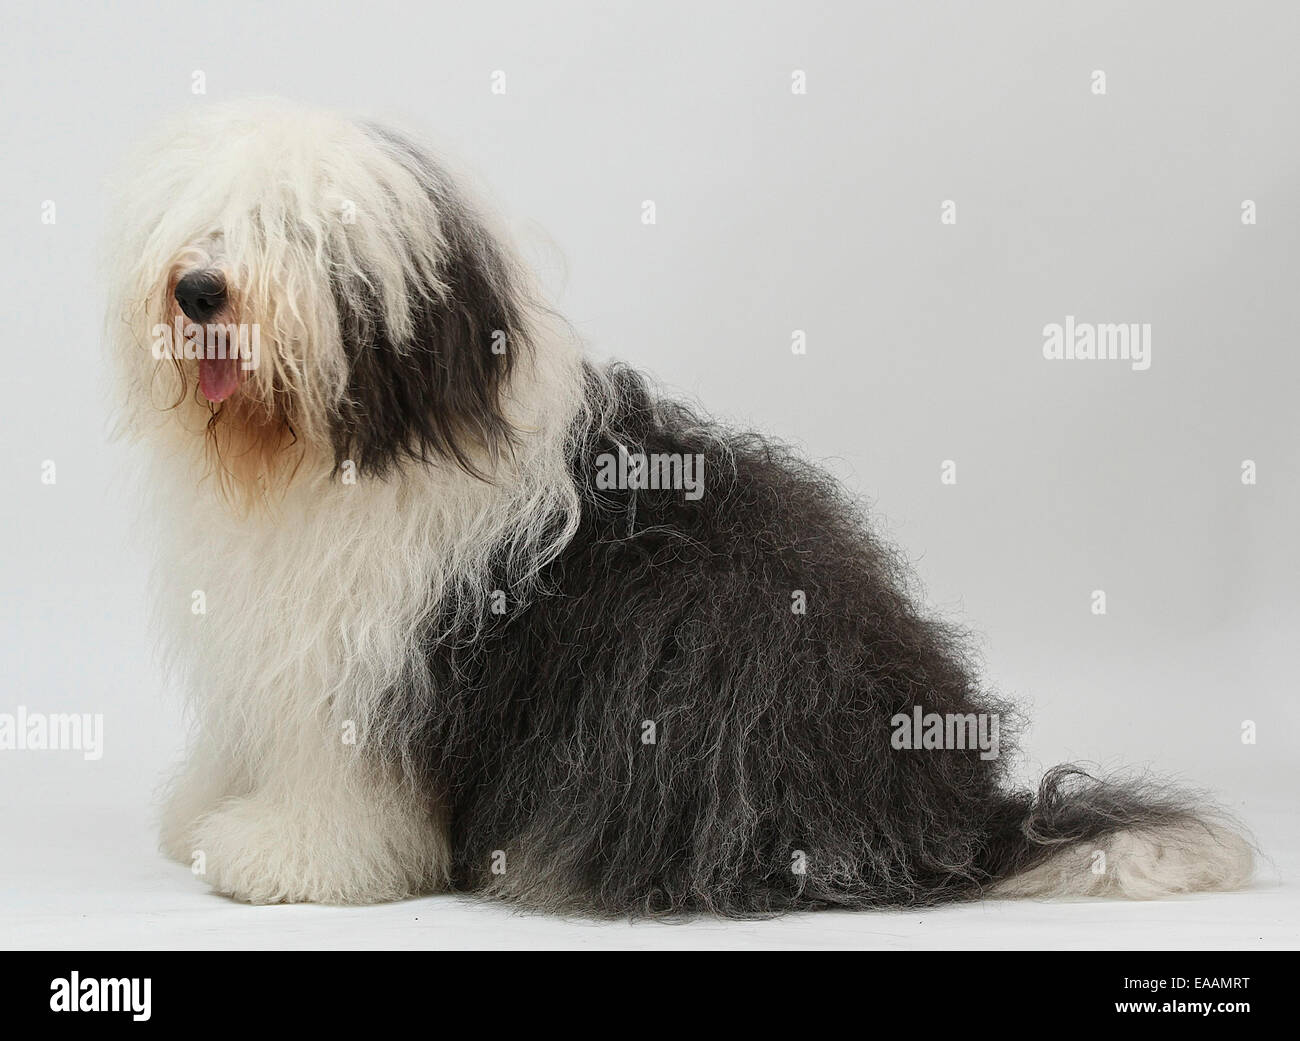 Old English sheep dog often associated with Dulux paint advert Stock Photo